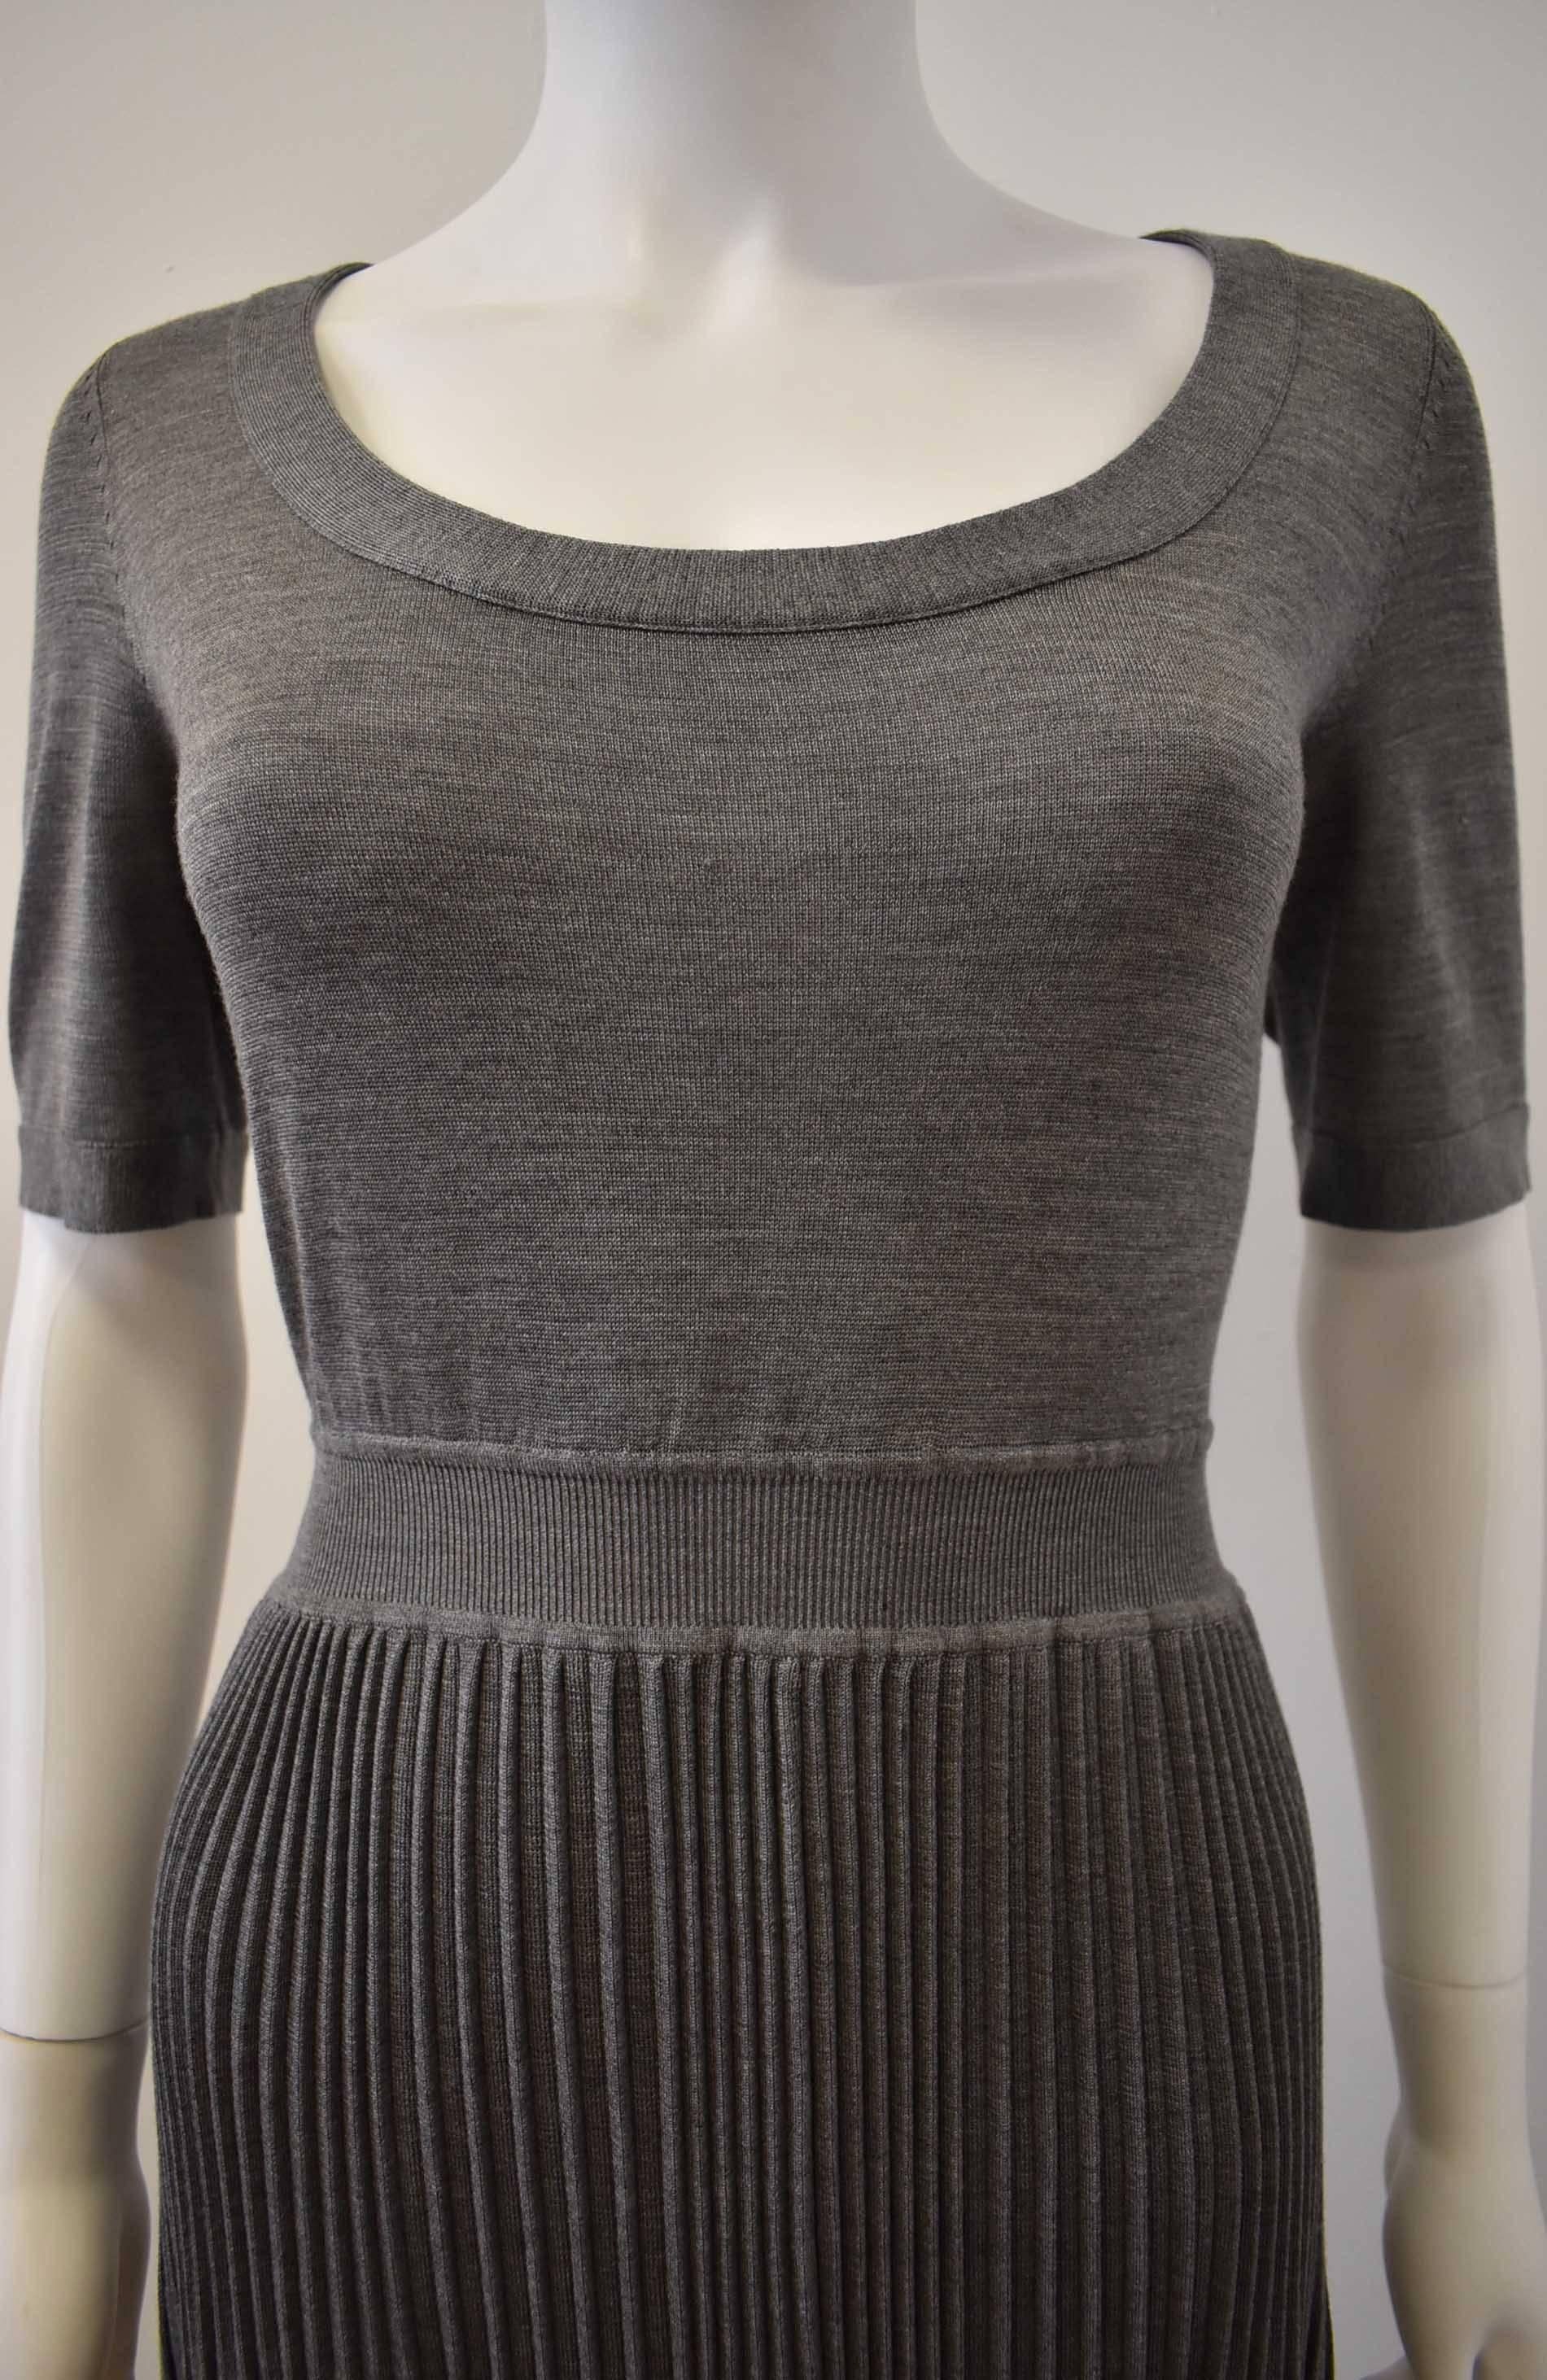 A beautiful and luxurious light grey silk and cashmere knitted dress with French fashion house Balenciaga. The dress has a scoop neckline, short sleeves and a classic skater skirt shape with fitted, stretch-knit waist and a flared and pleated skirt.